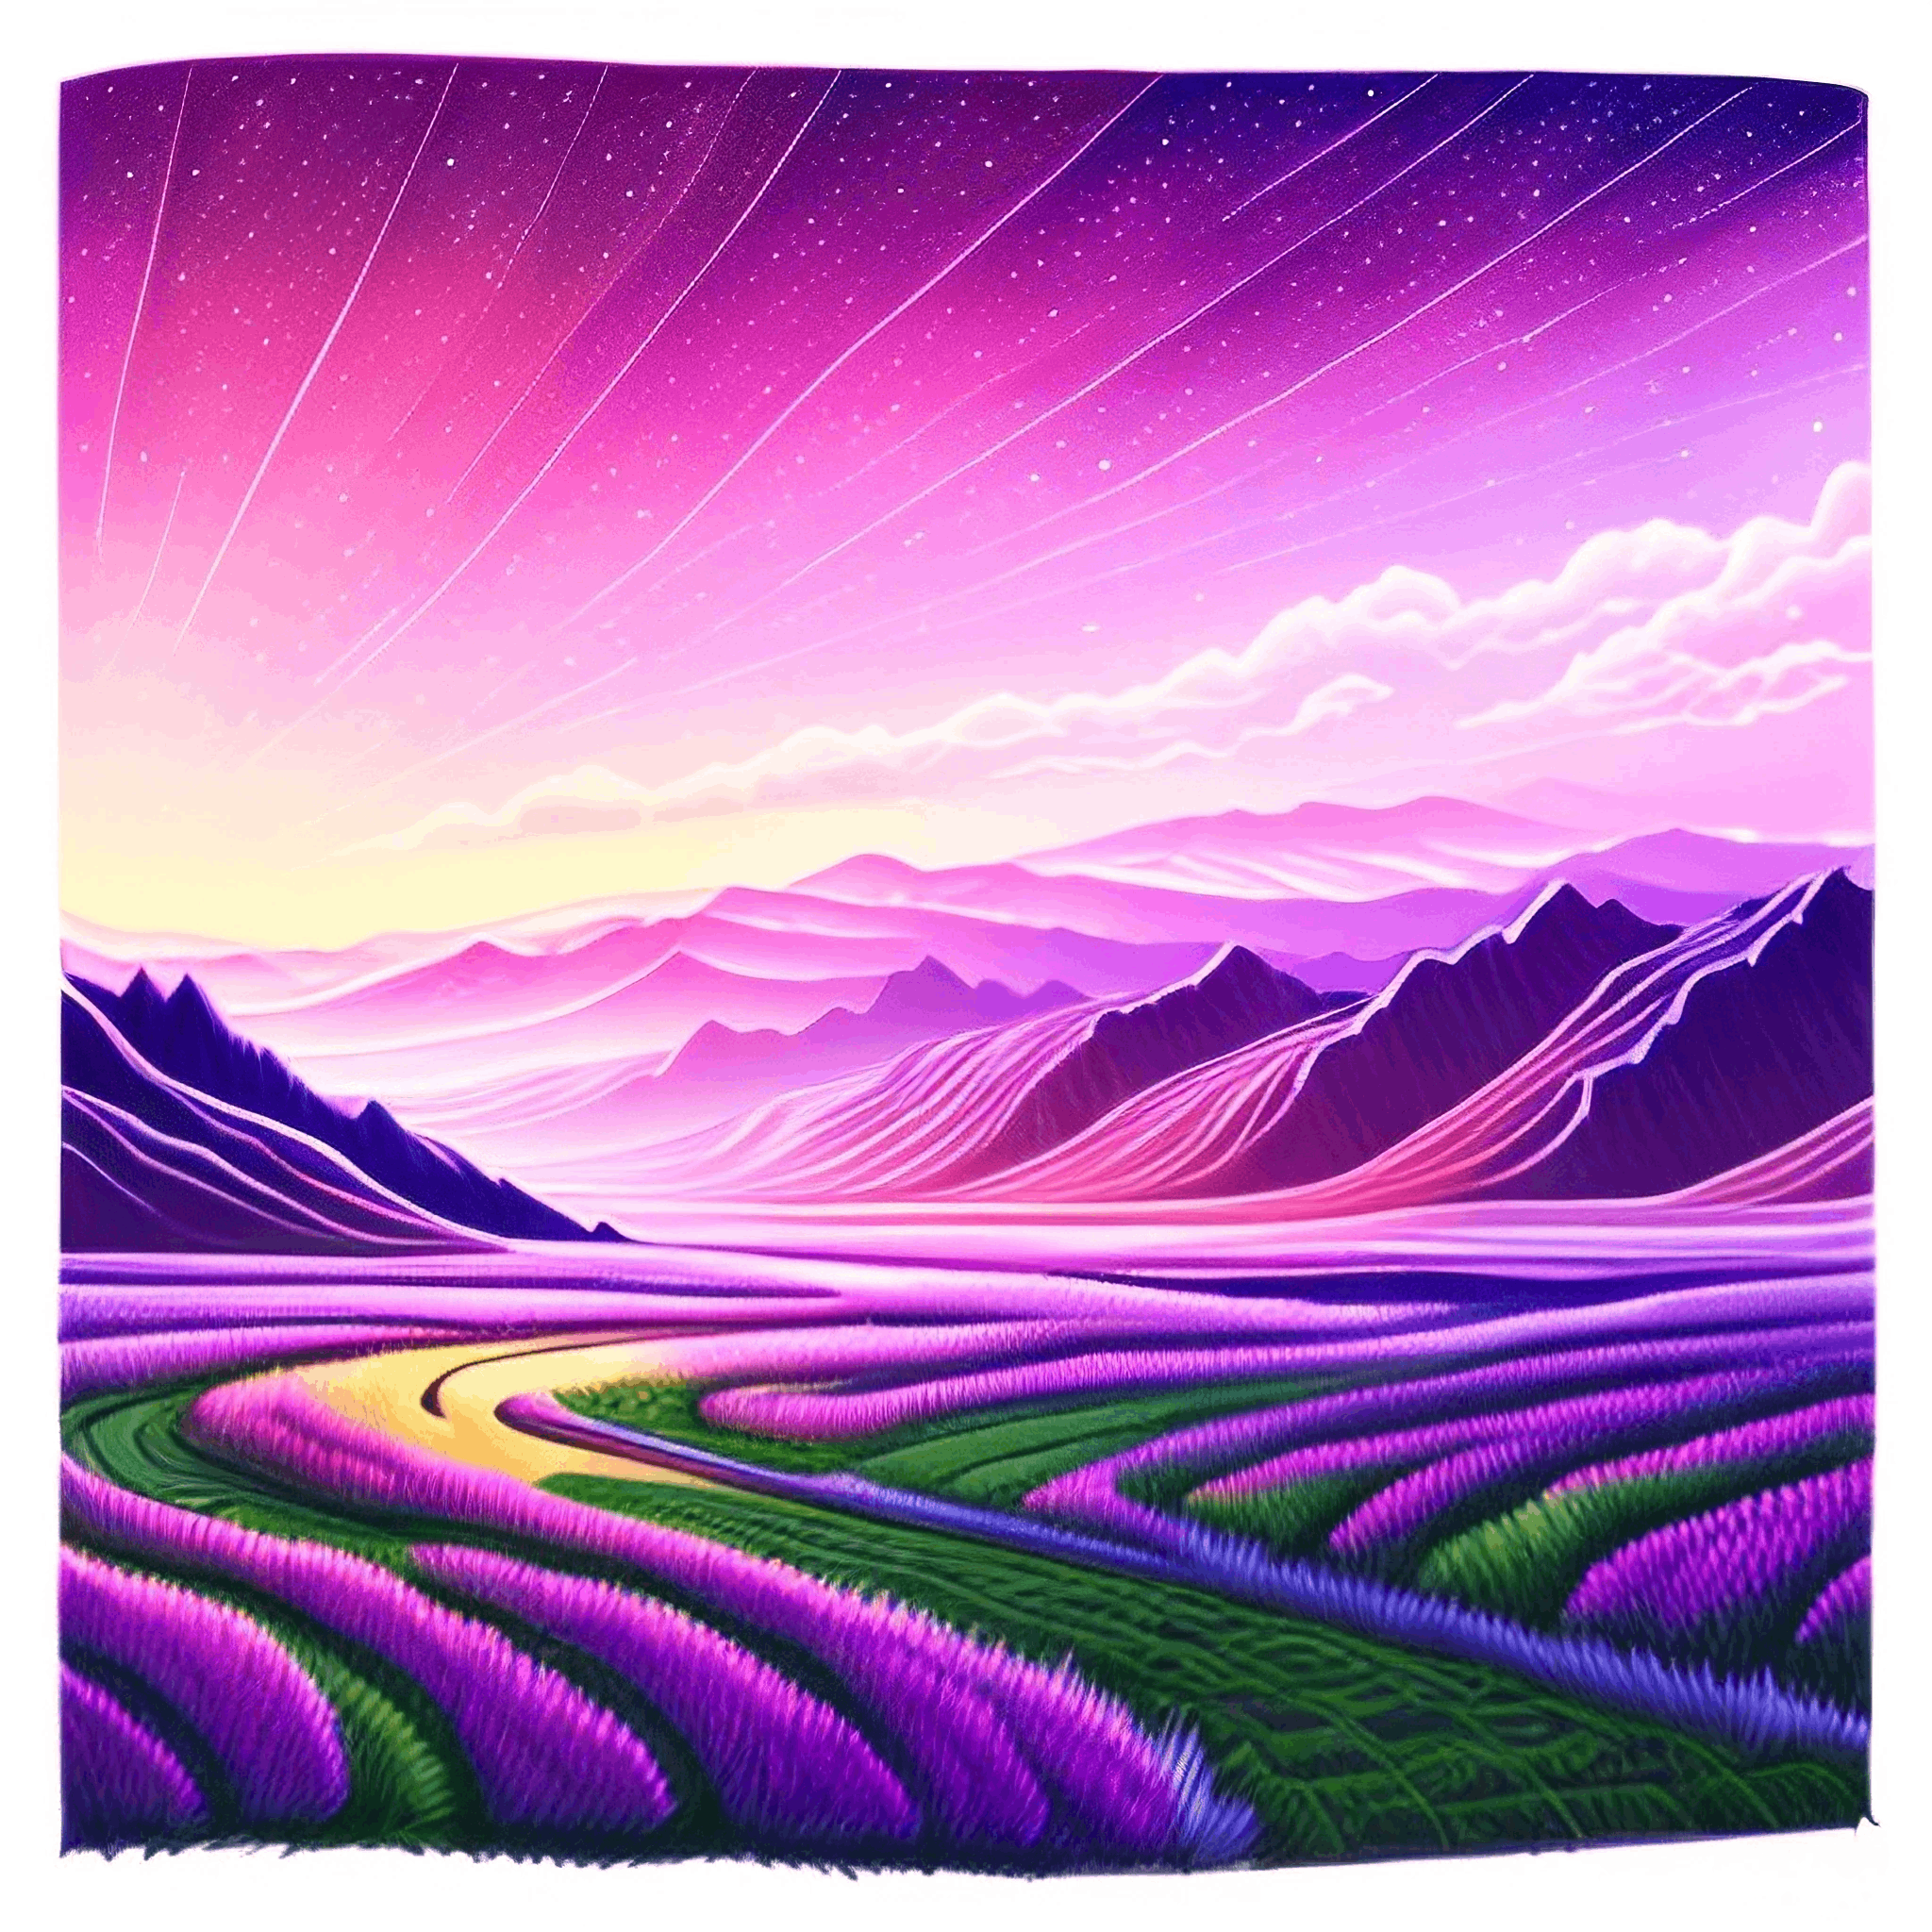 a painting of a purple field with mountains in the background